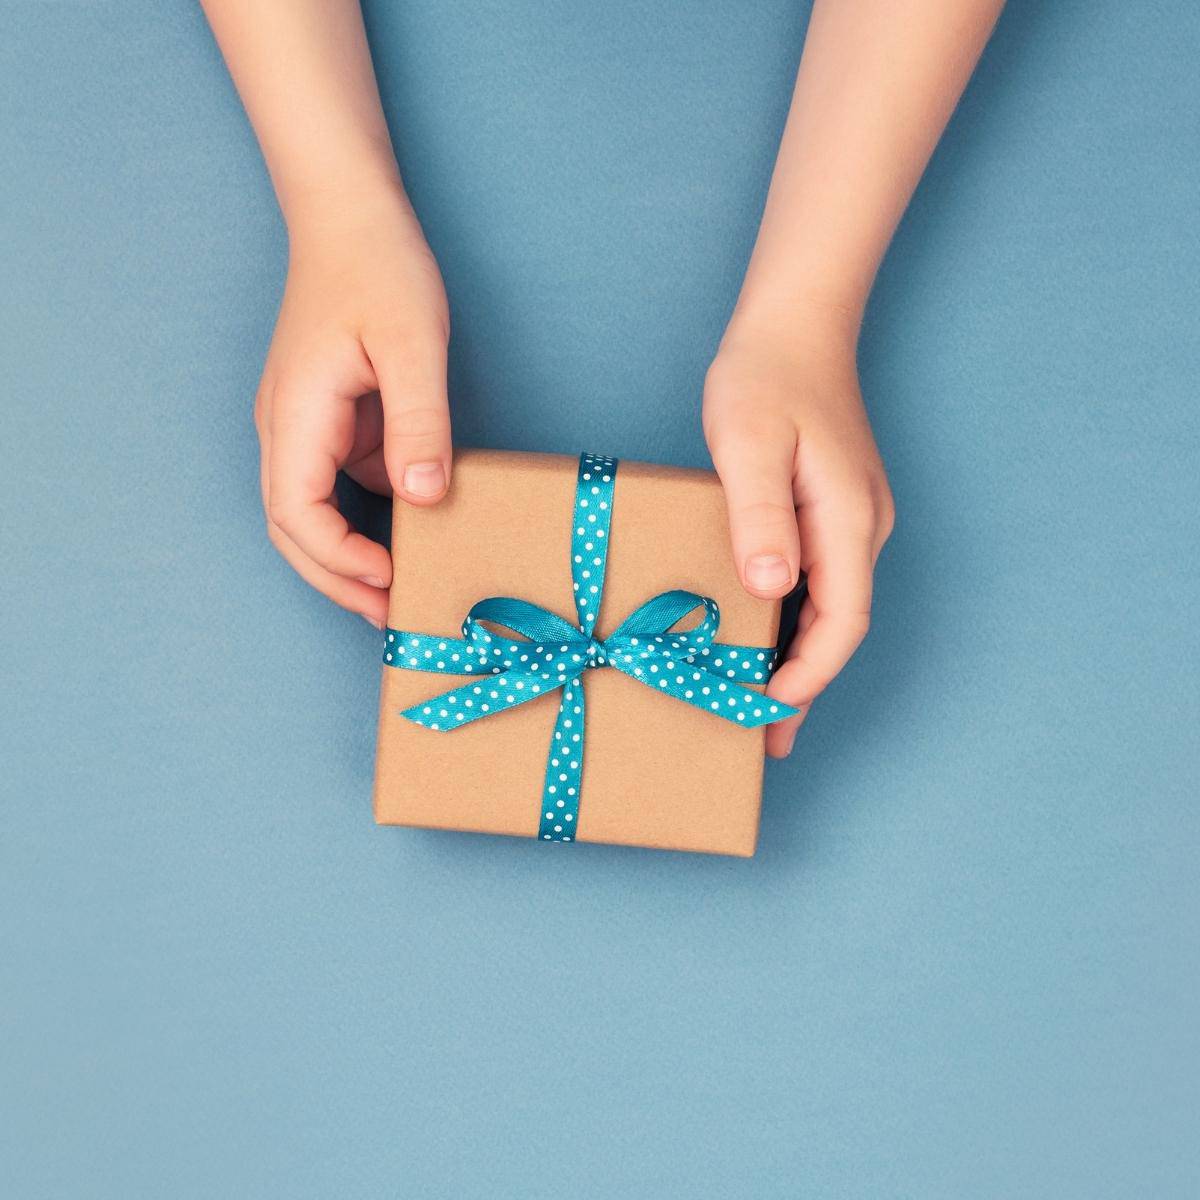 10 Gift ideas from Small Businesses on Amazon